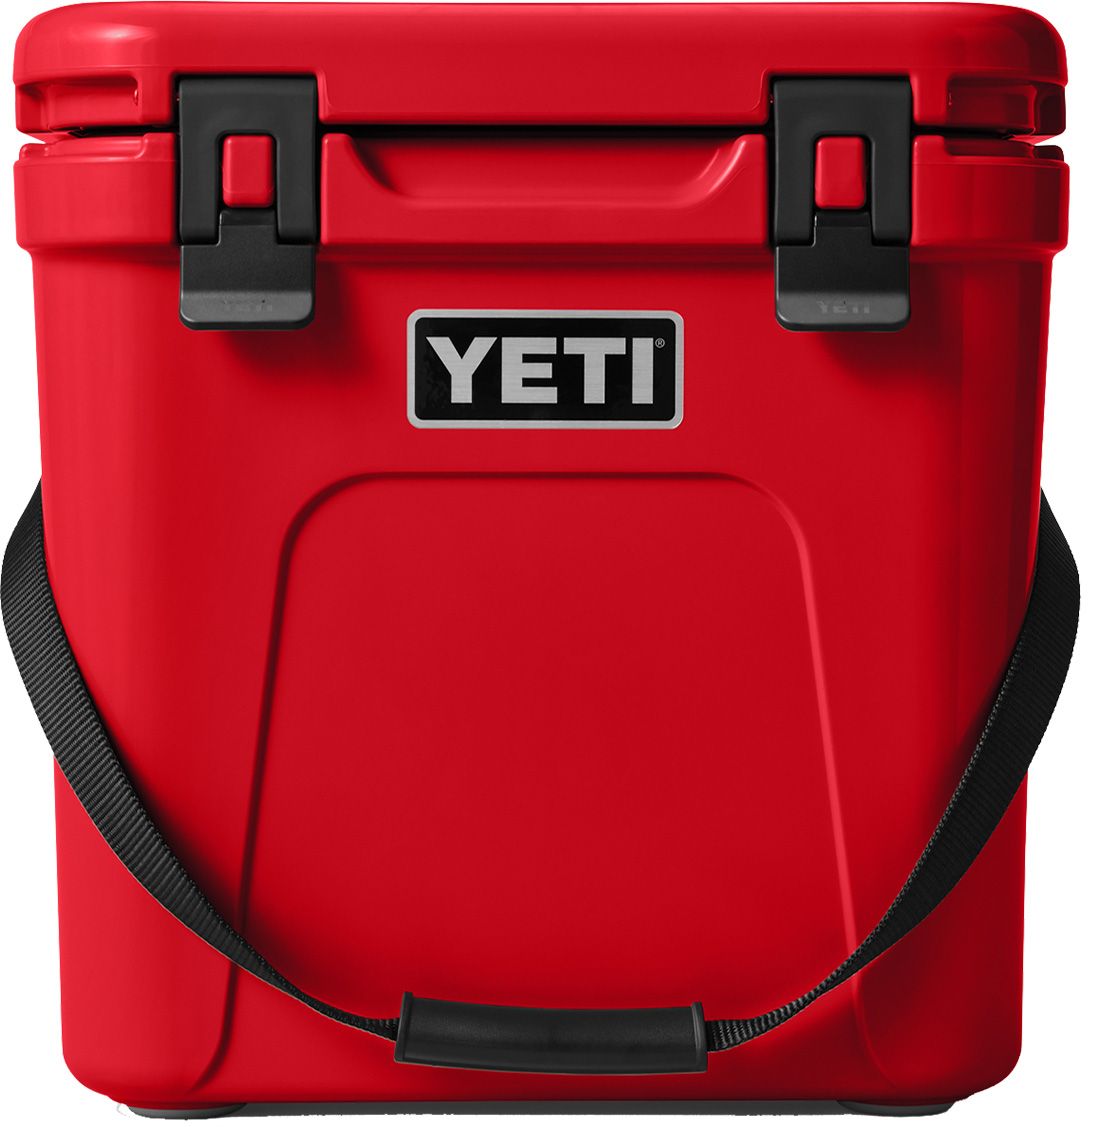 Shop Whale Burgee Yeti 12 oz Colster Slim Can Insulator at